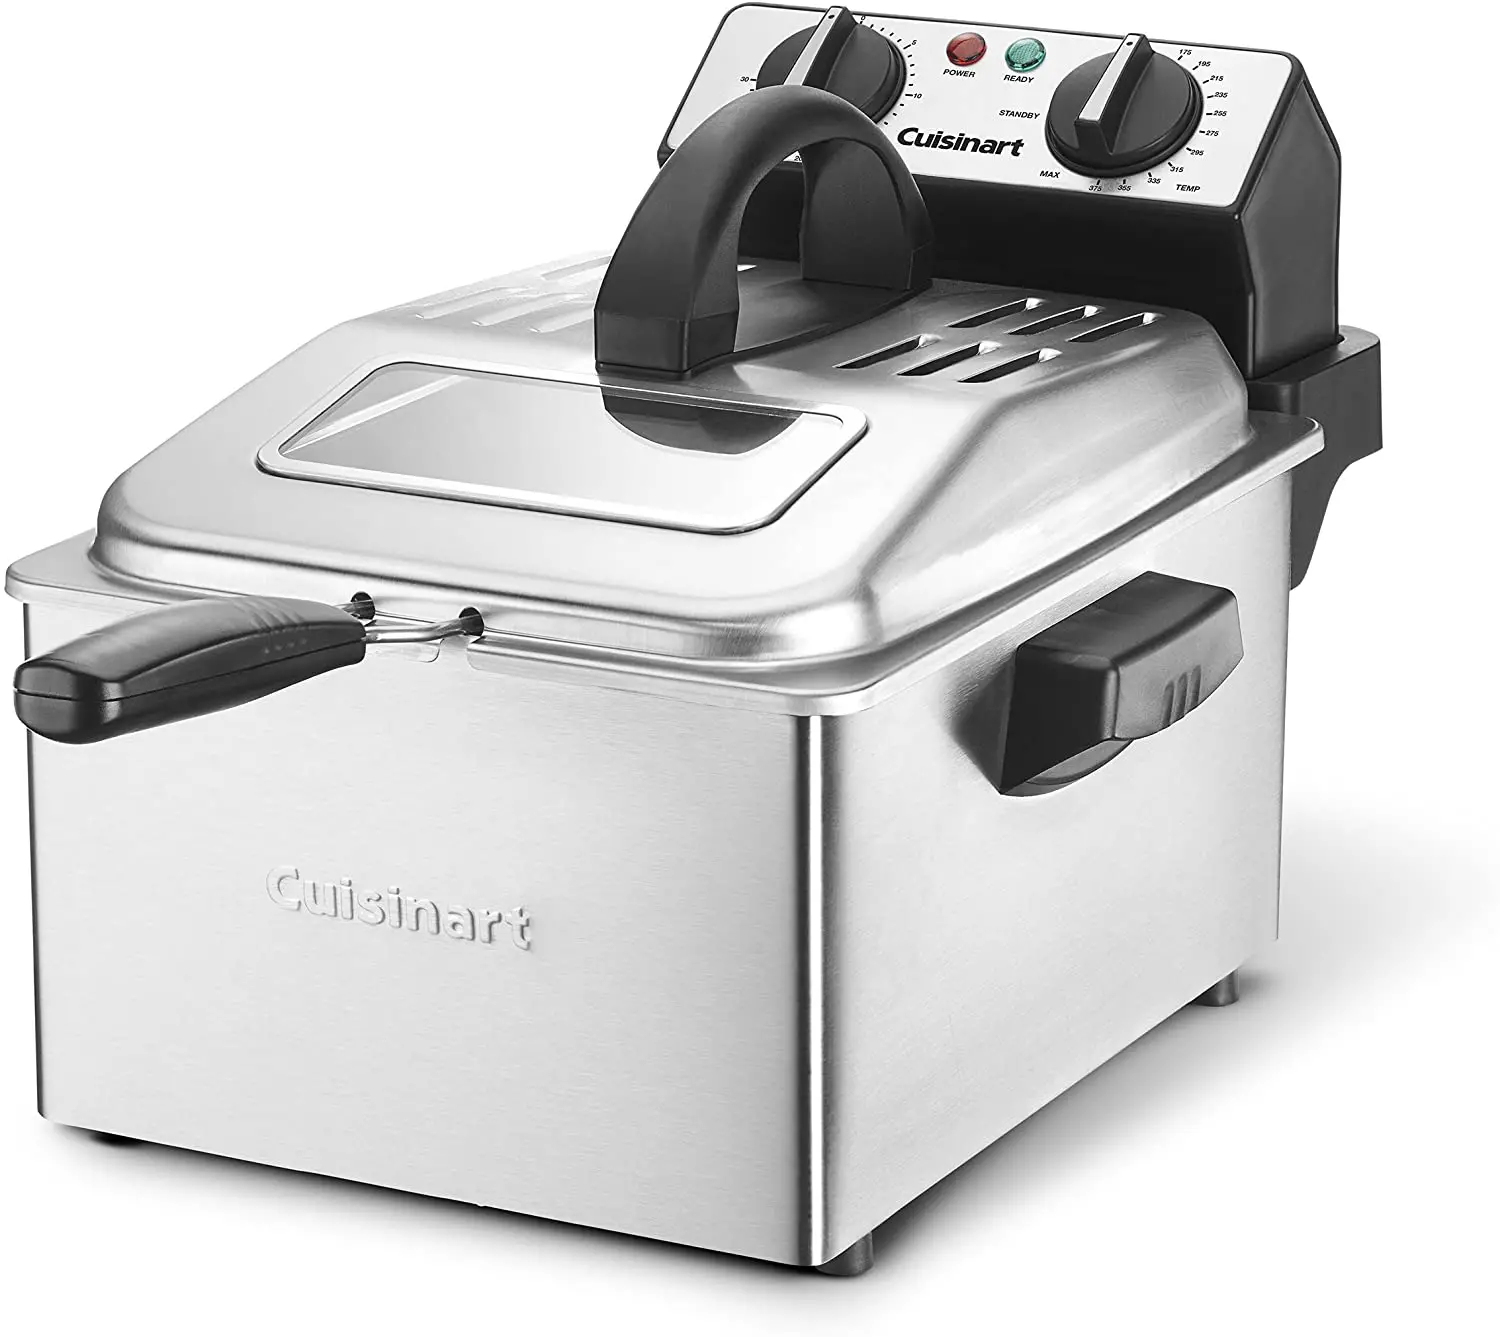 Cuisinart CDF-200P1 is a Deep Fryers For A Large Family with cool touch lid and side handles